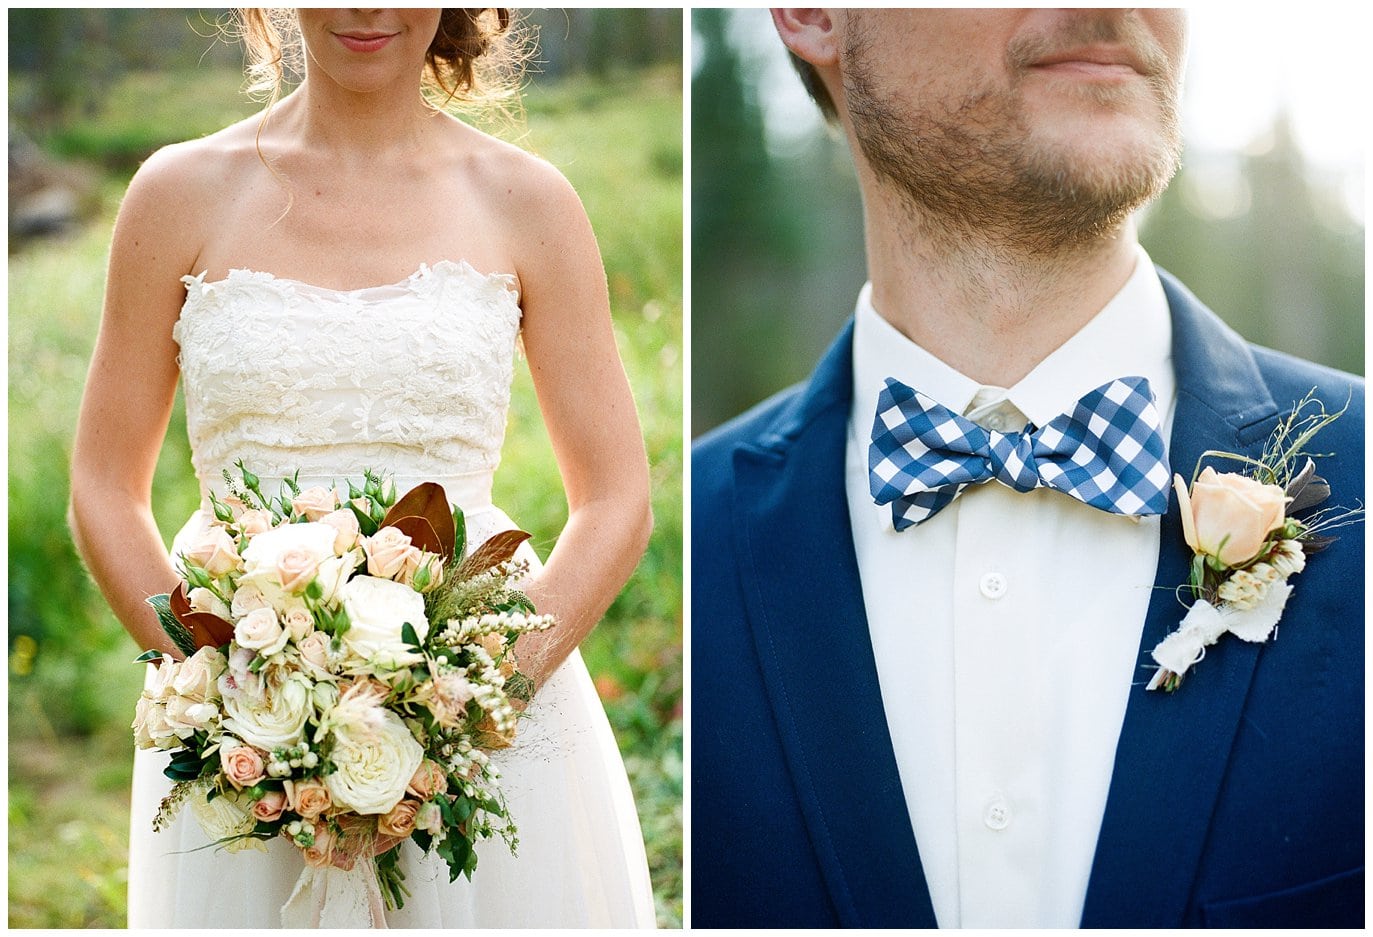 checkered bow tie and lace wedding dress at Piney River Ranch intimate wedding by Beaver Creek wedding photographer Jennie Crate Photographer